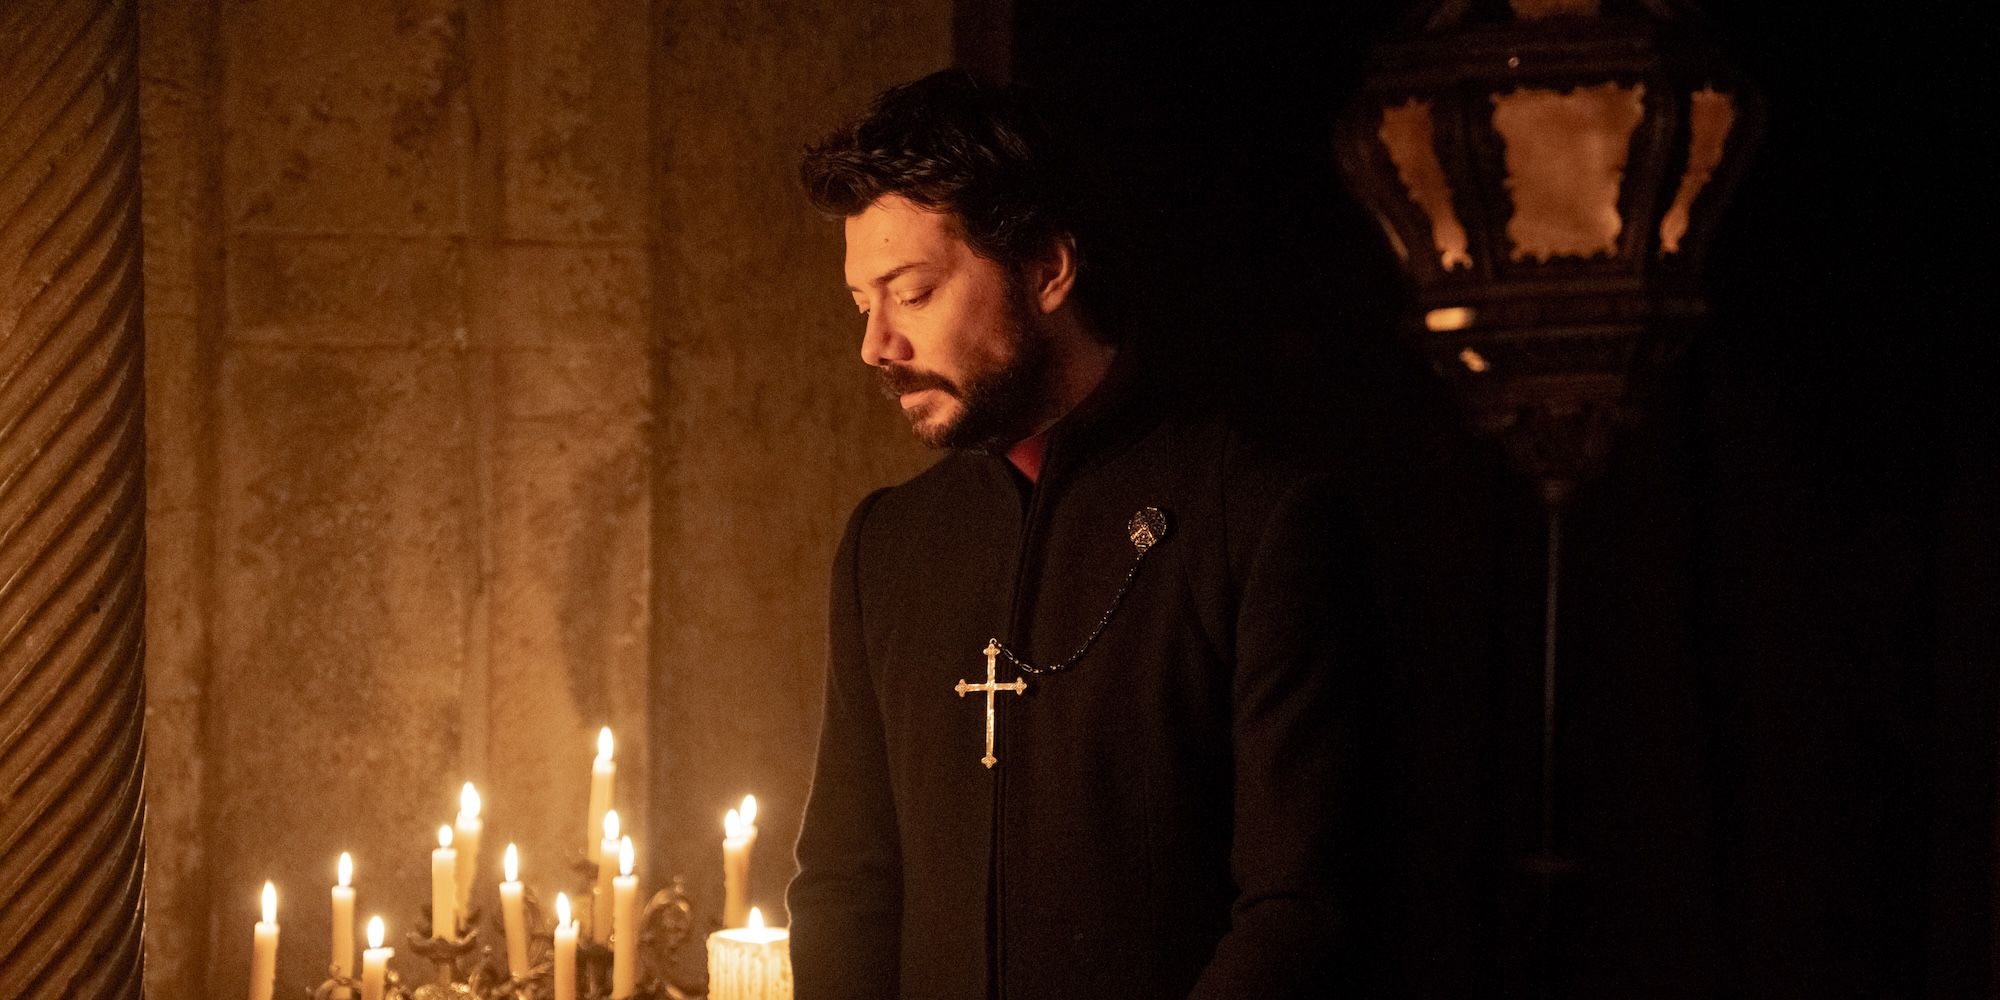 Alvaro Morte as Father Tedeschi in a candle-lit room in Immaculate